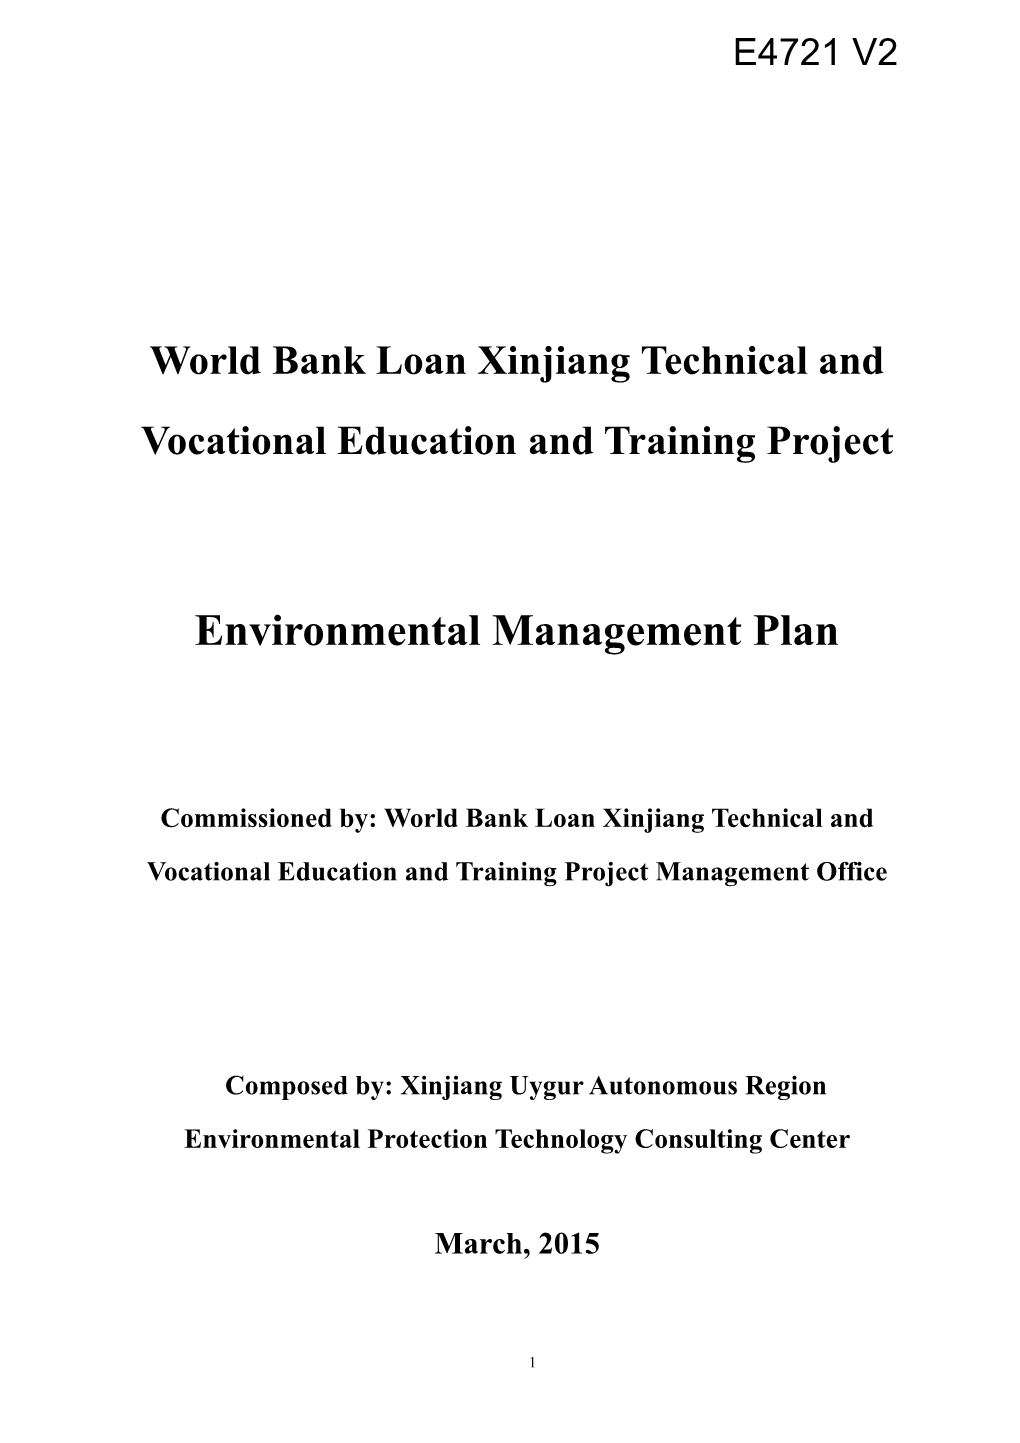 World Bank Loan Xinjiang Technical and Vocational Education and Training Project